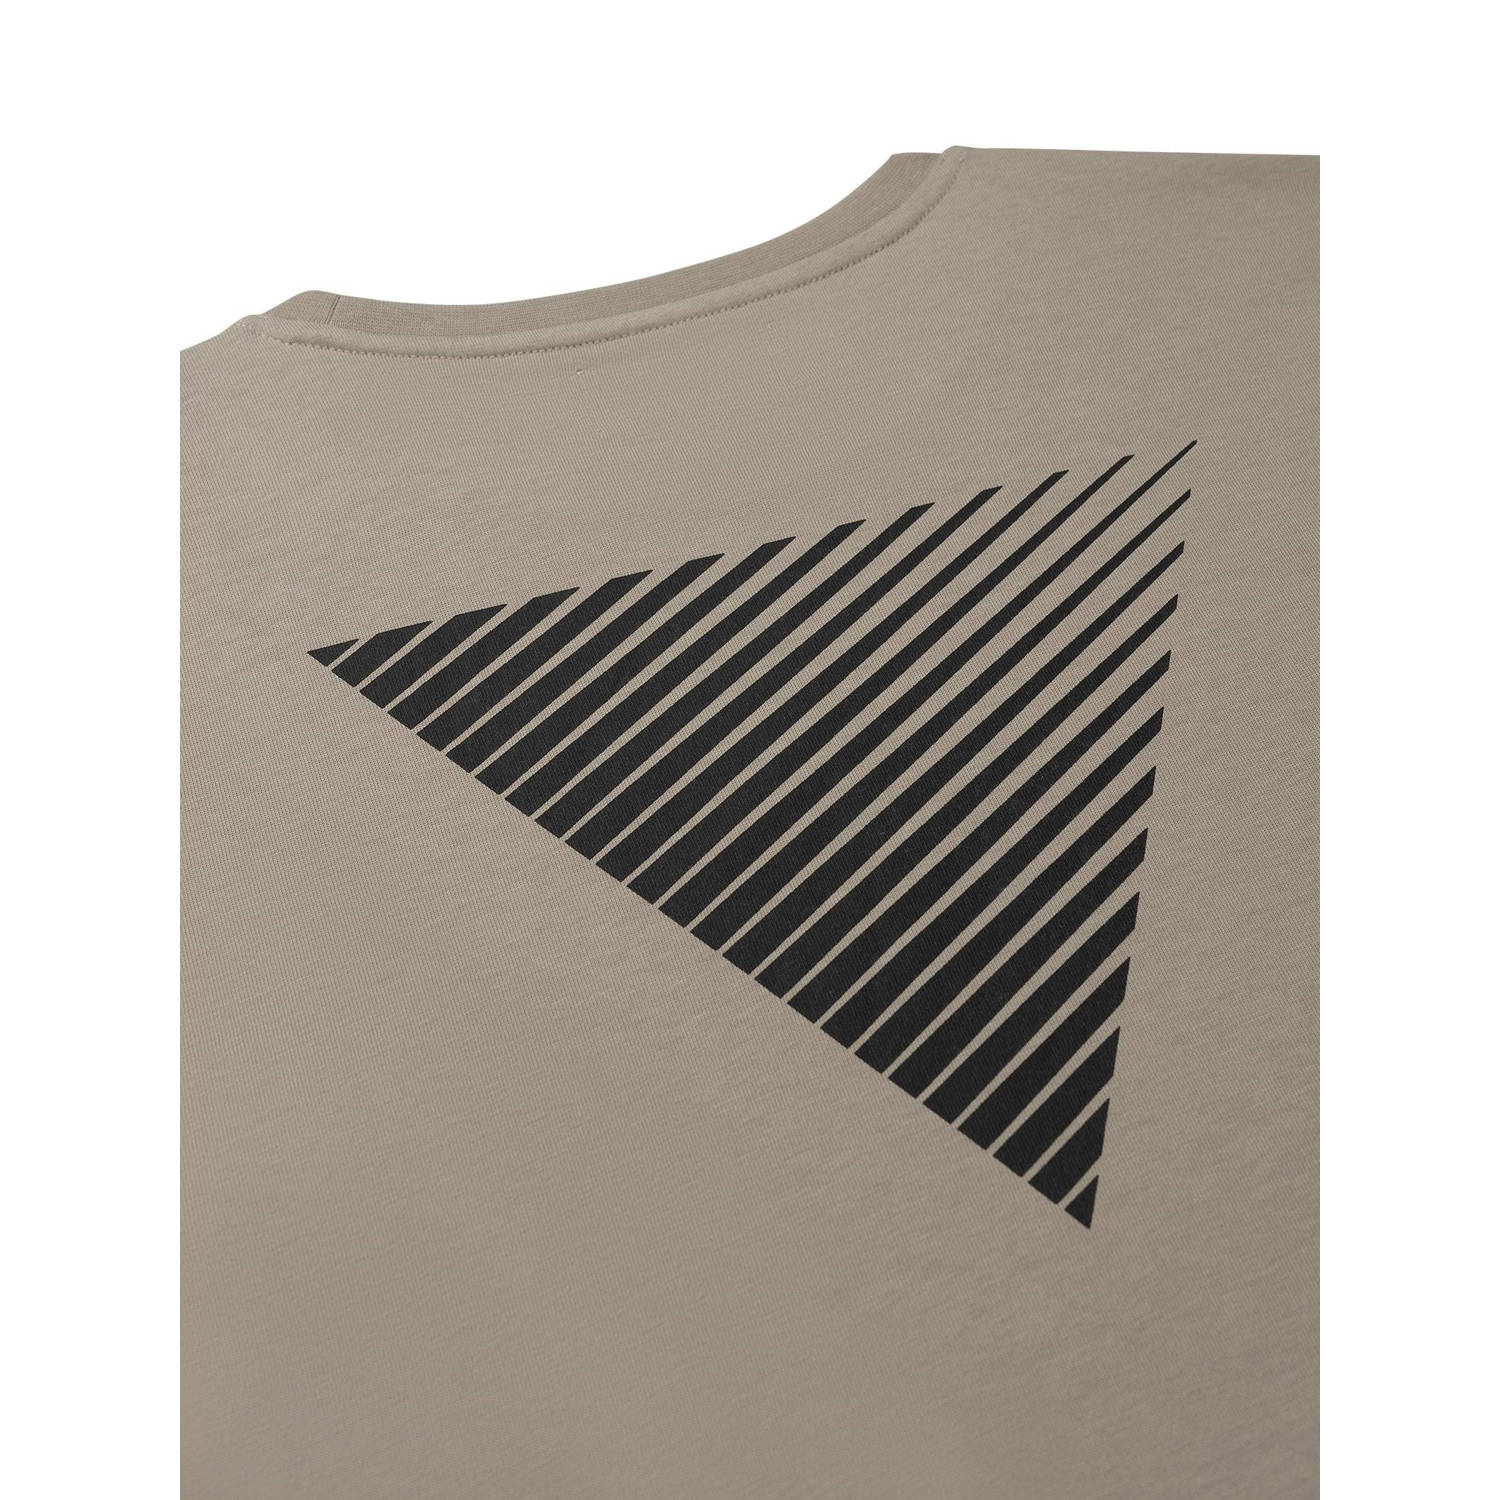 Pure Path regular fit T-shirt met backprint taupe